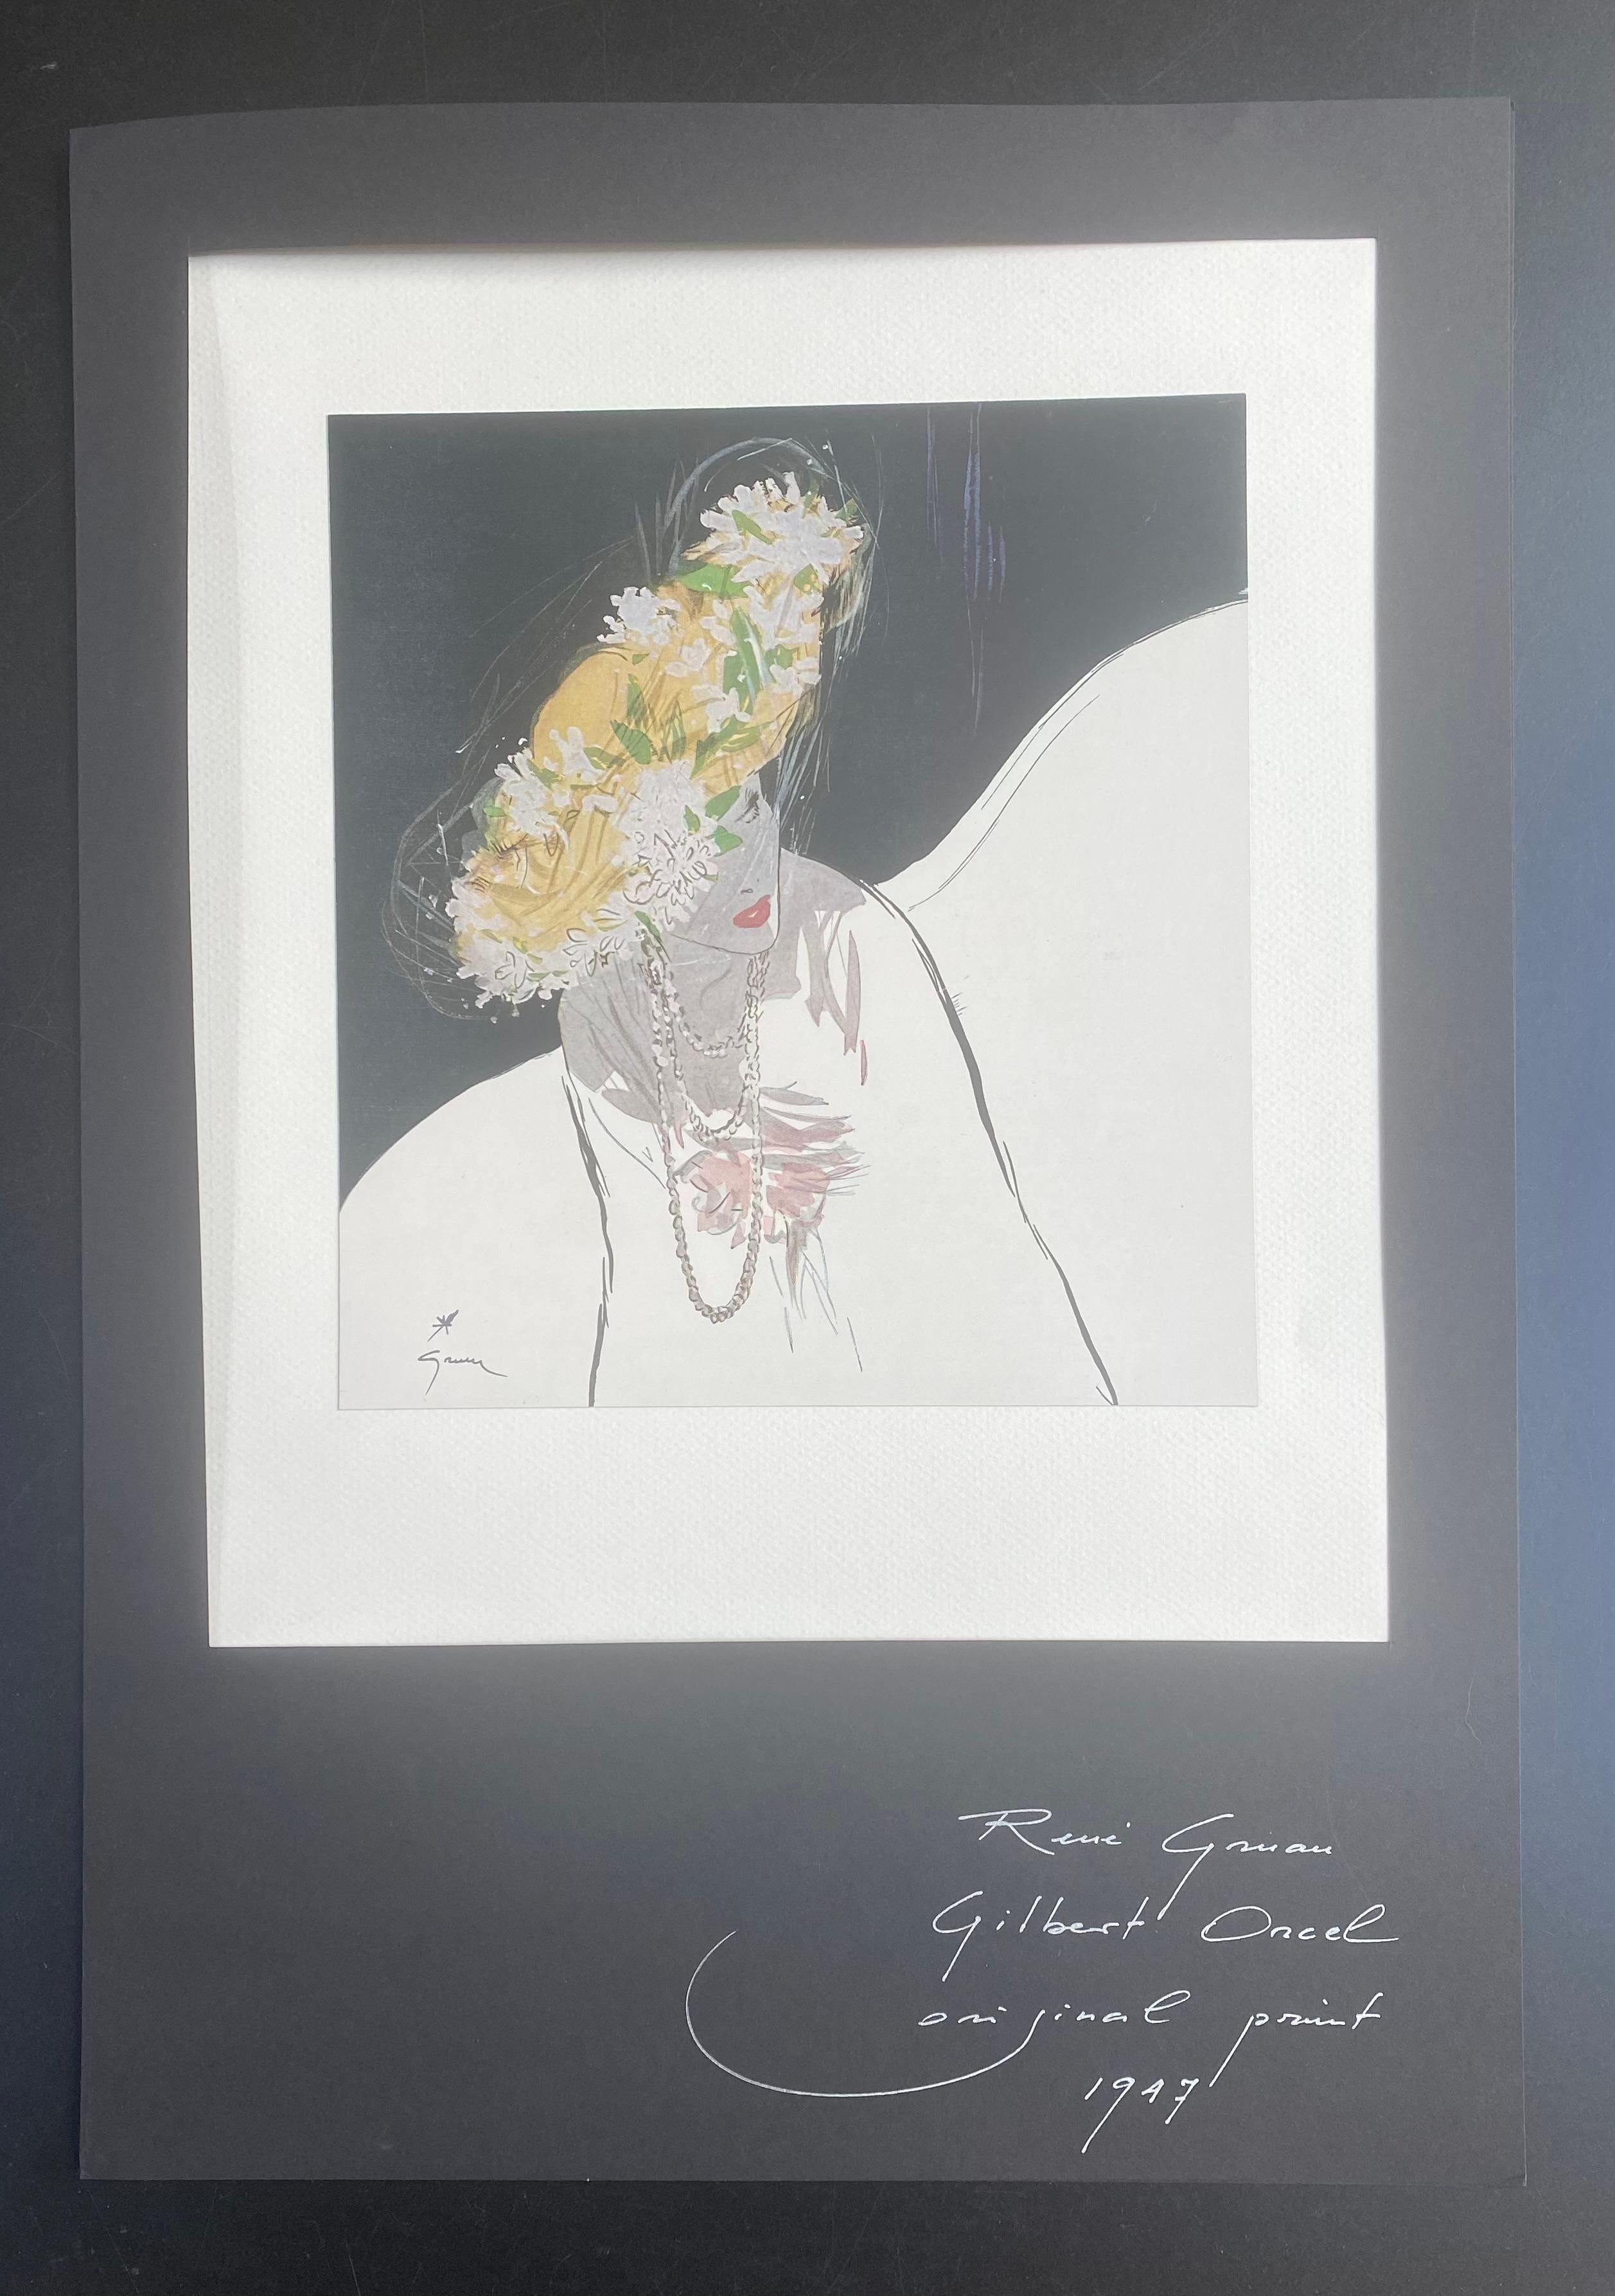 René Grau - Fashion illustration for Gilbert Orcel.
Signed and dated lower right. 
Original Print. 
1947.
Size with frame : 50 cm x 35 cm.
Size without frame : 38 cm x 31 cm.
190€.

The Official Spring 1947 Collection Issue